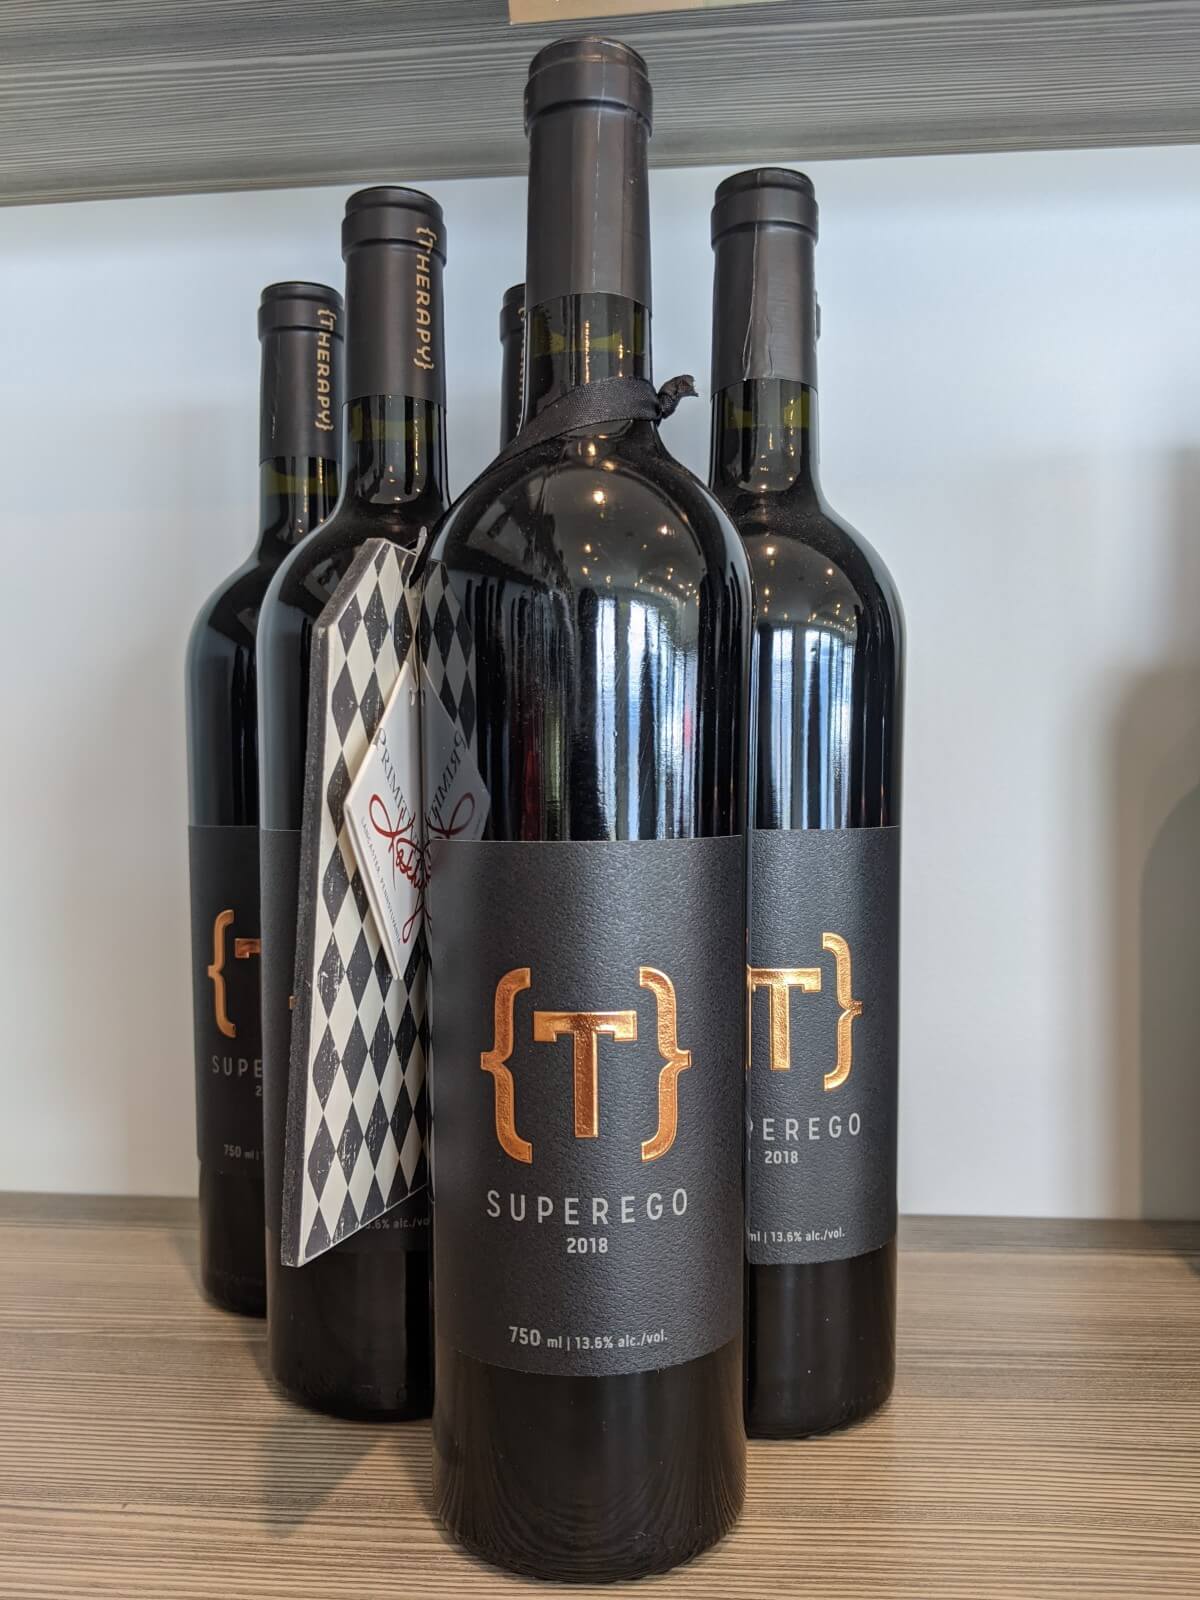 Close up of Super Ego wine bottles at Therapy Vineyards, with five bottles lined up in a pyramid formation